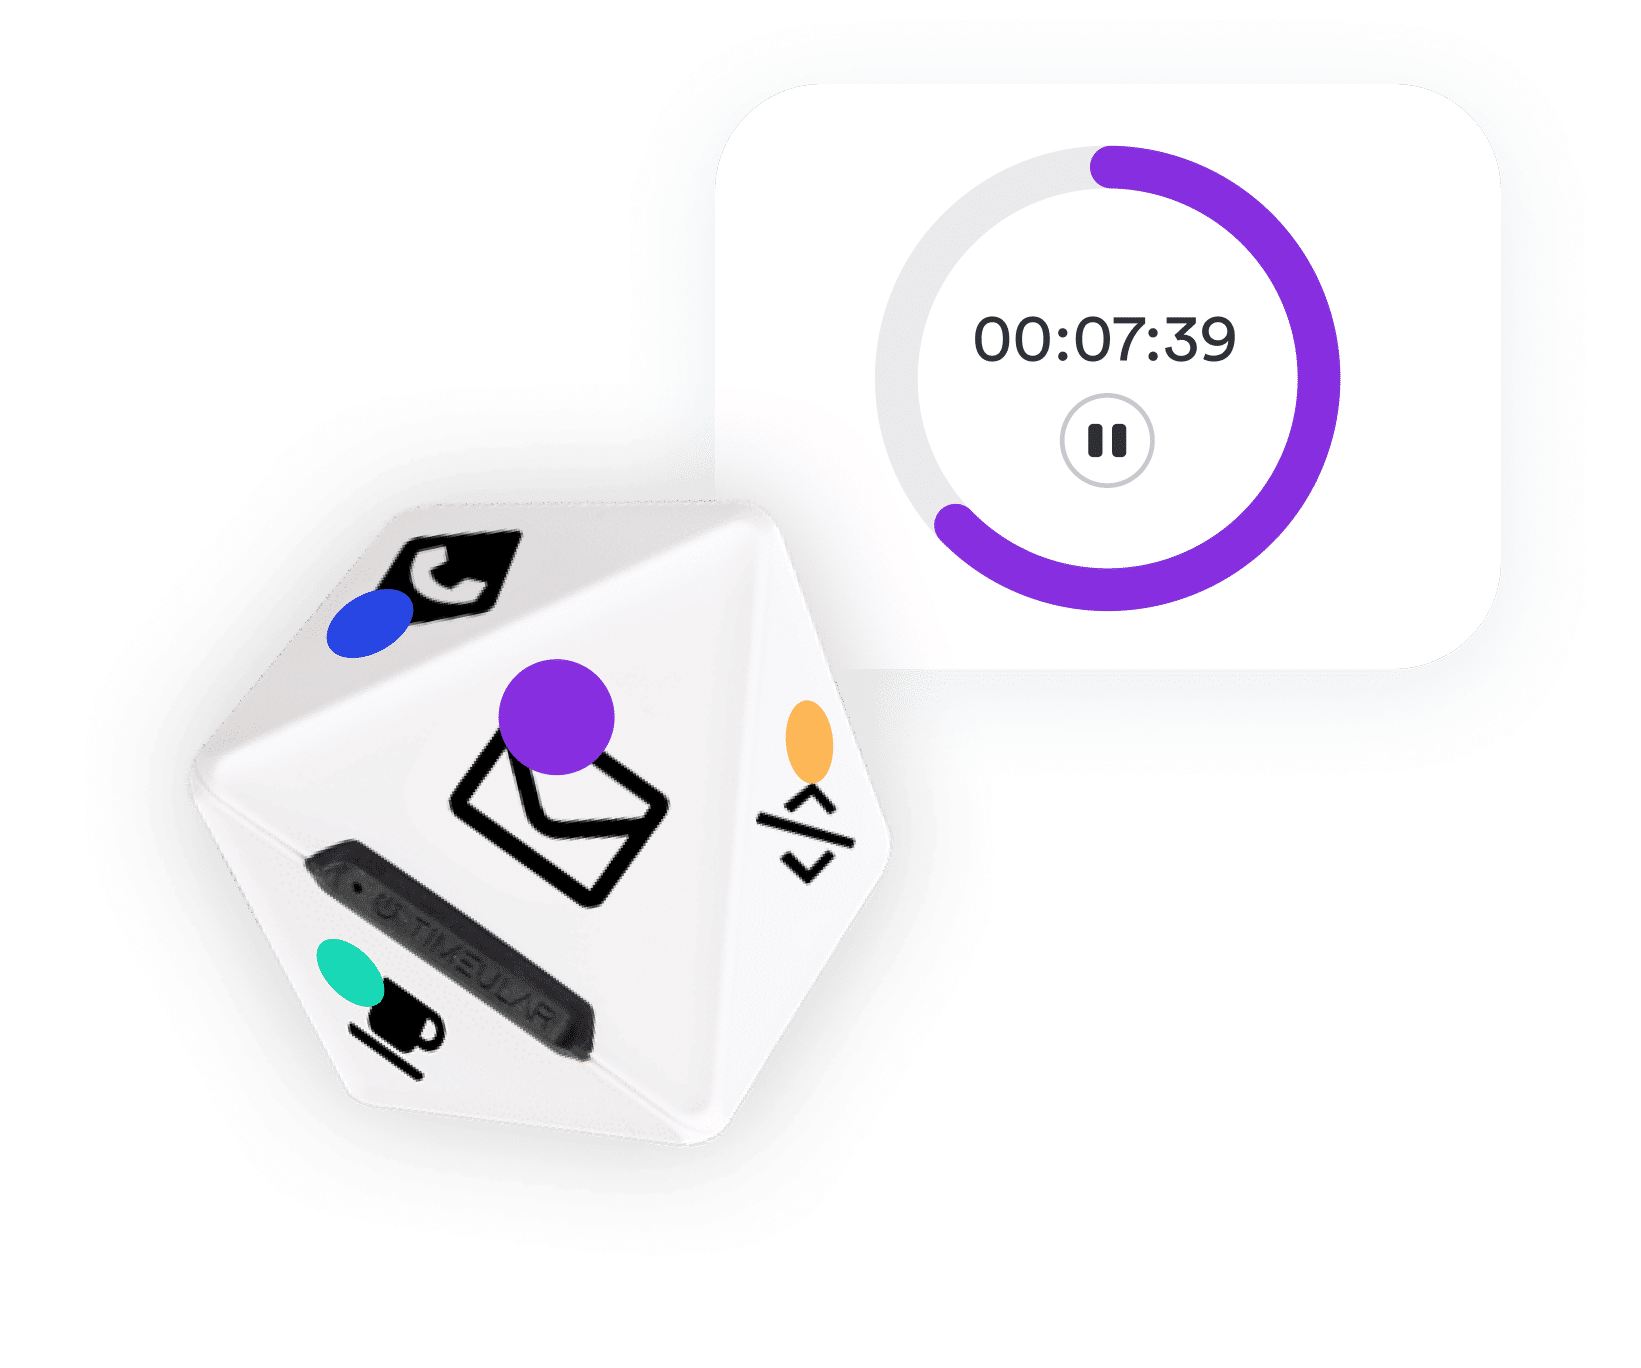 Capture, analyze and bill more time with the Timeular Tracker